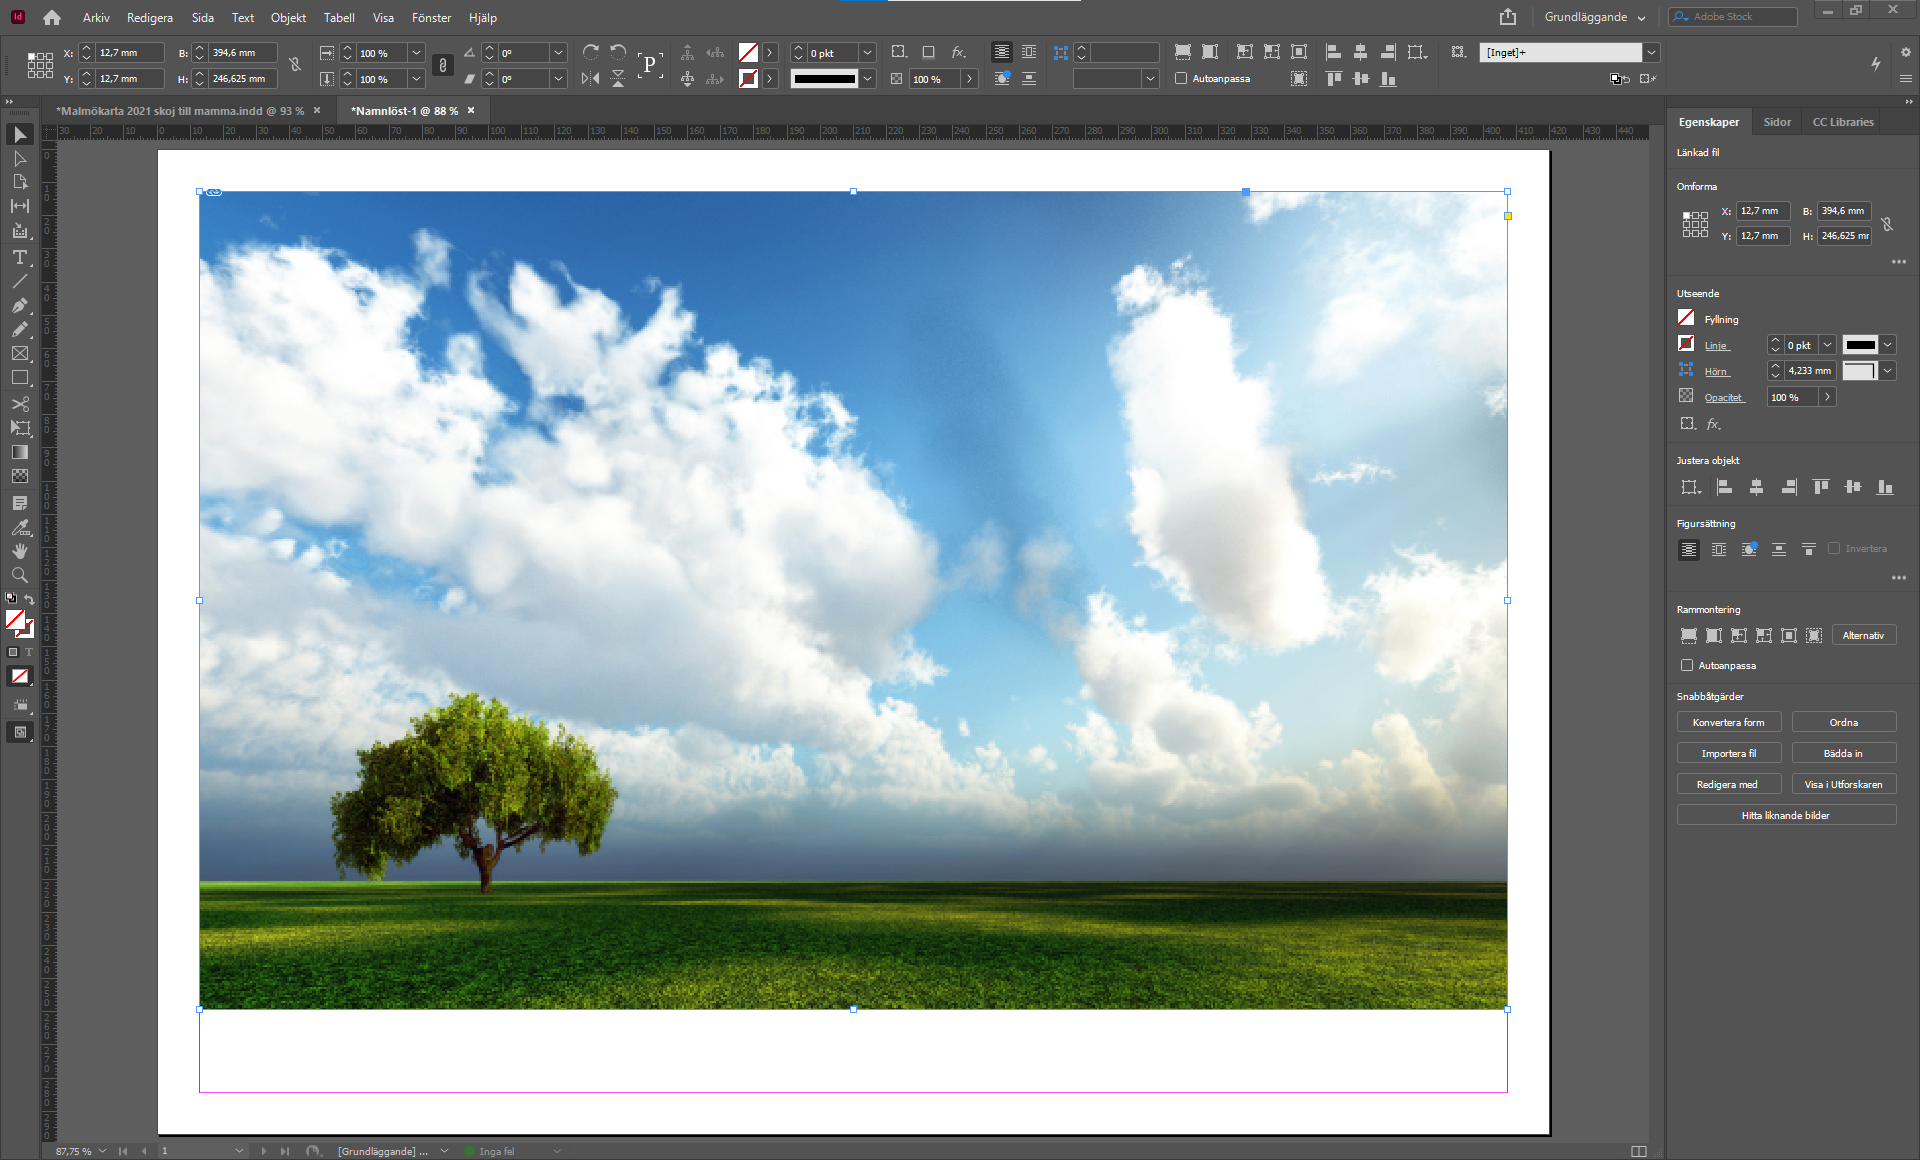 An image mounted into InDesign